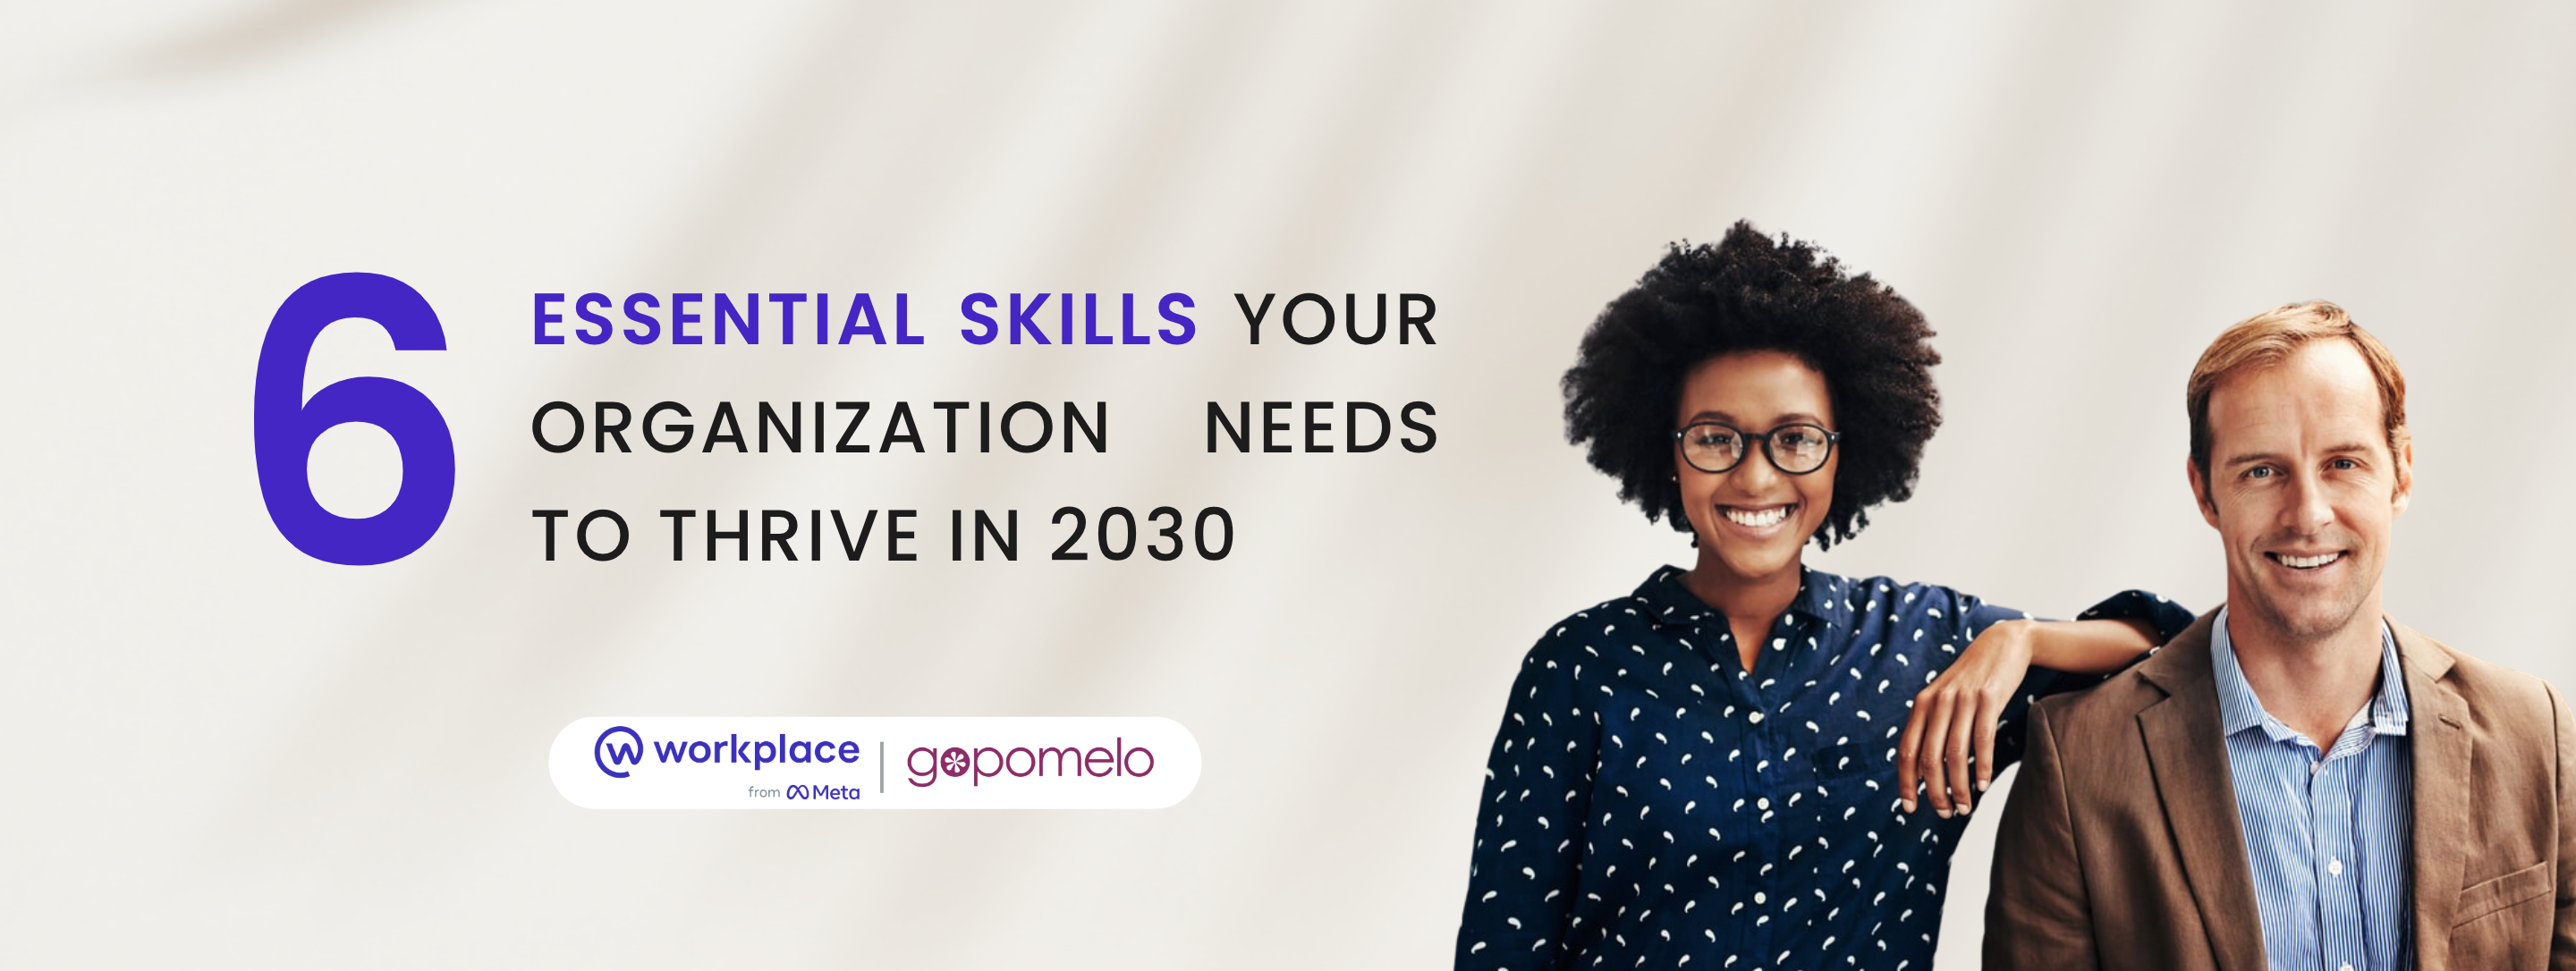 6 Essential Skills Your Organization Needs to Thrive in 2030 | GoPomelo